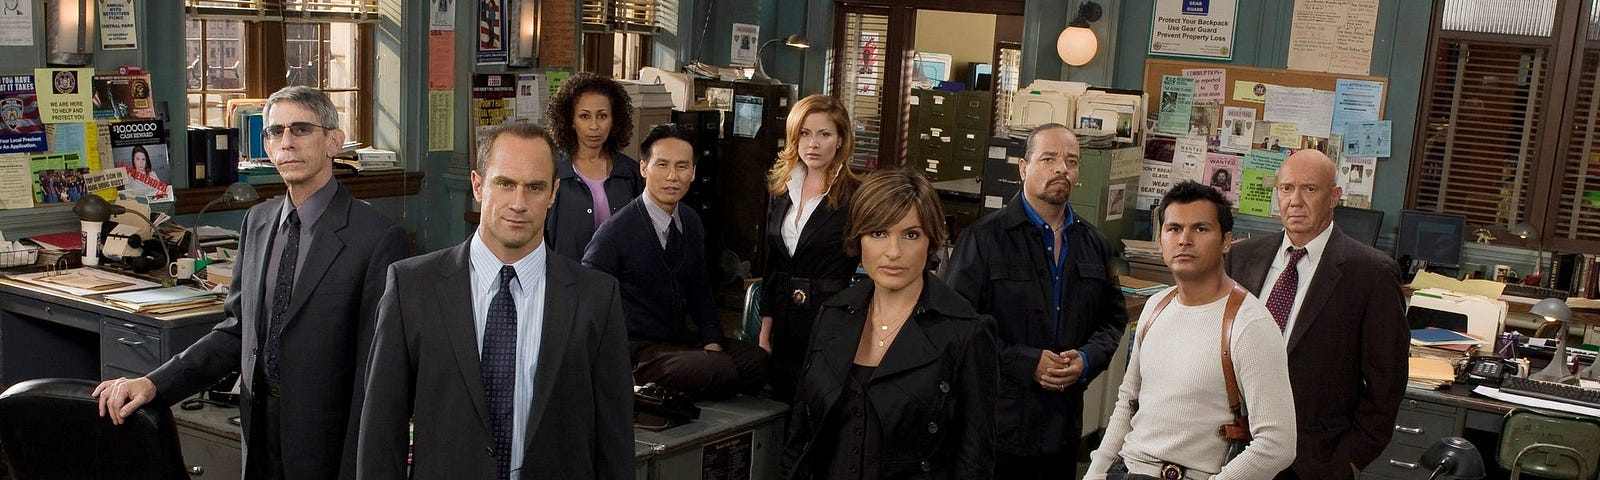 The cast of “Law and Order: SVU.”